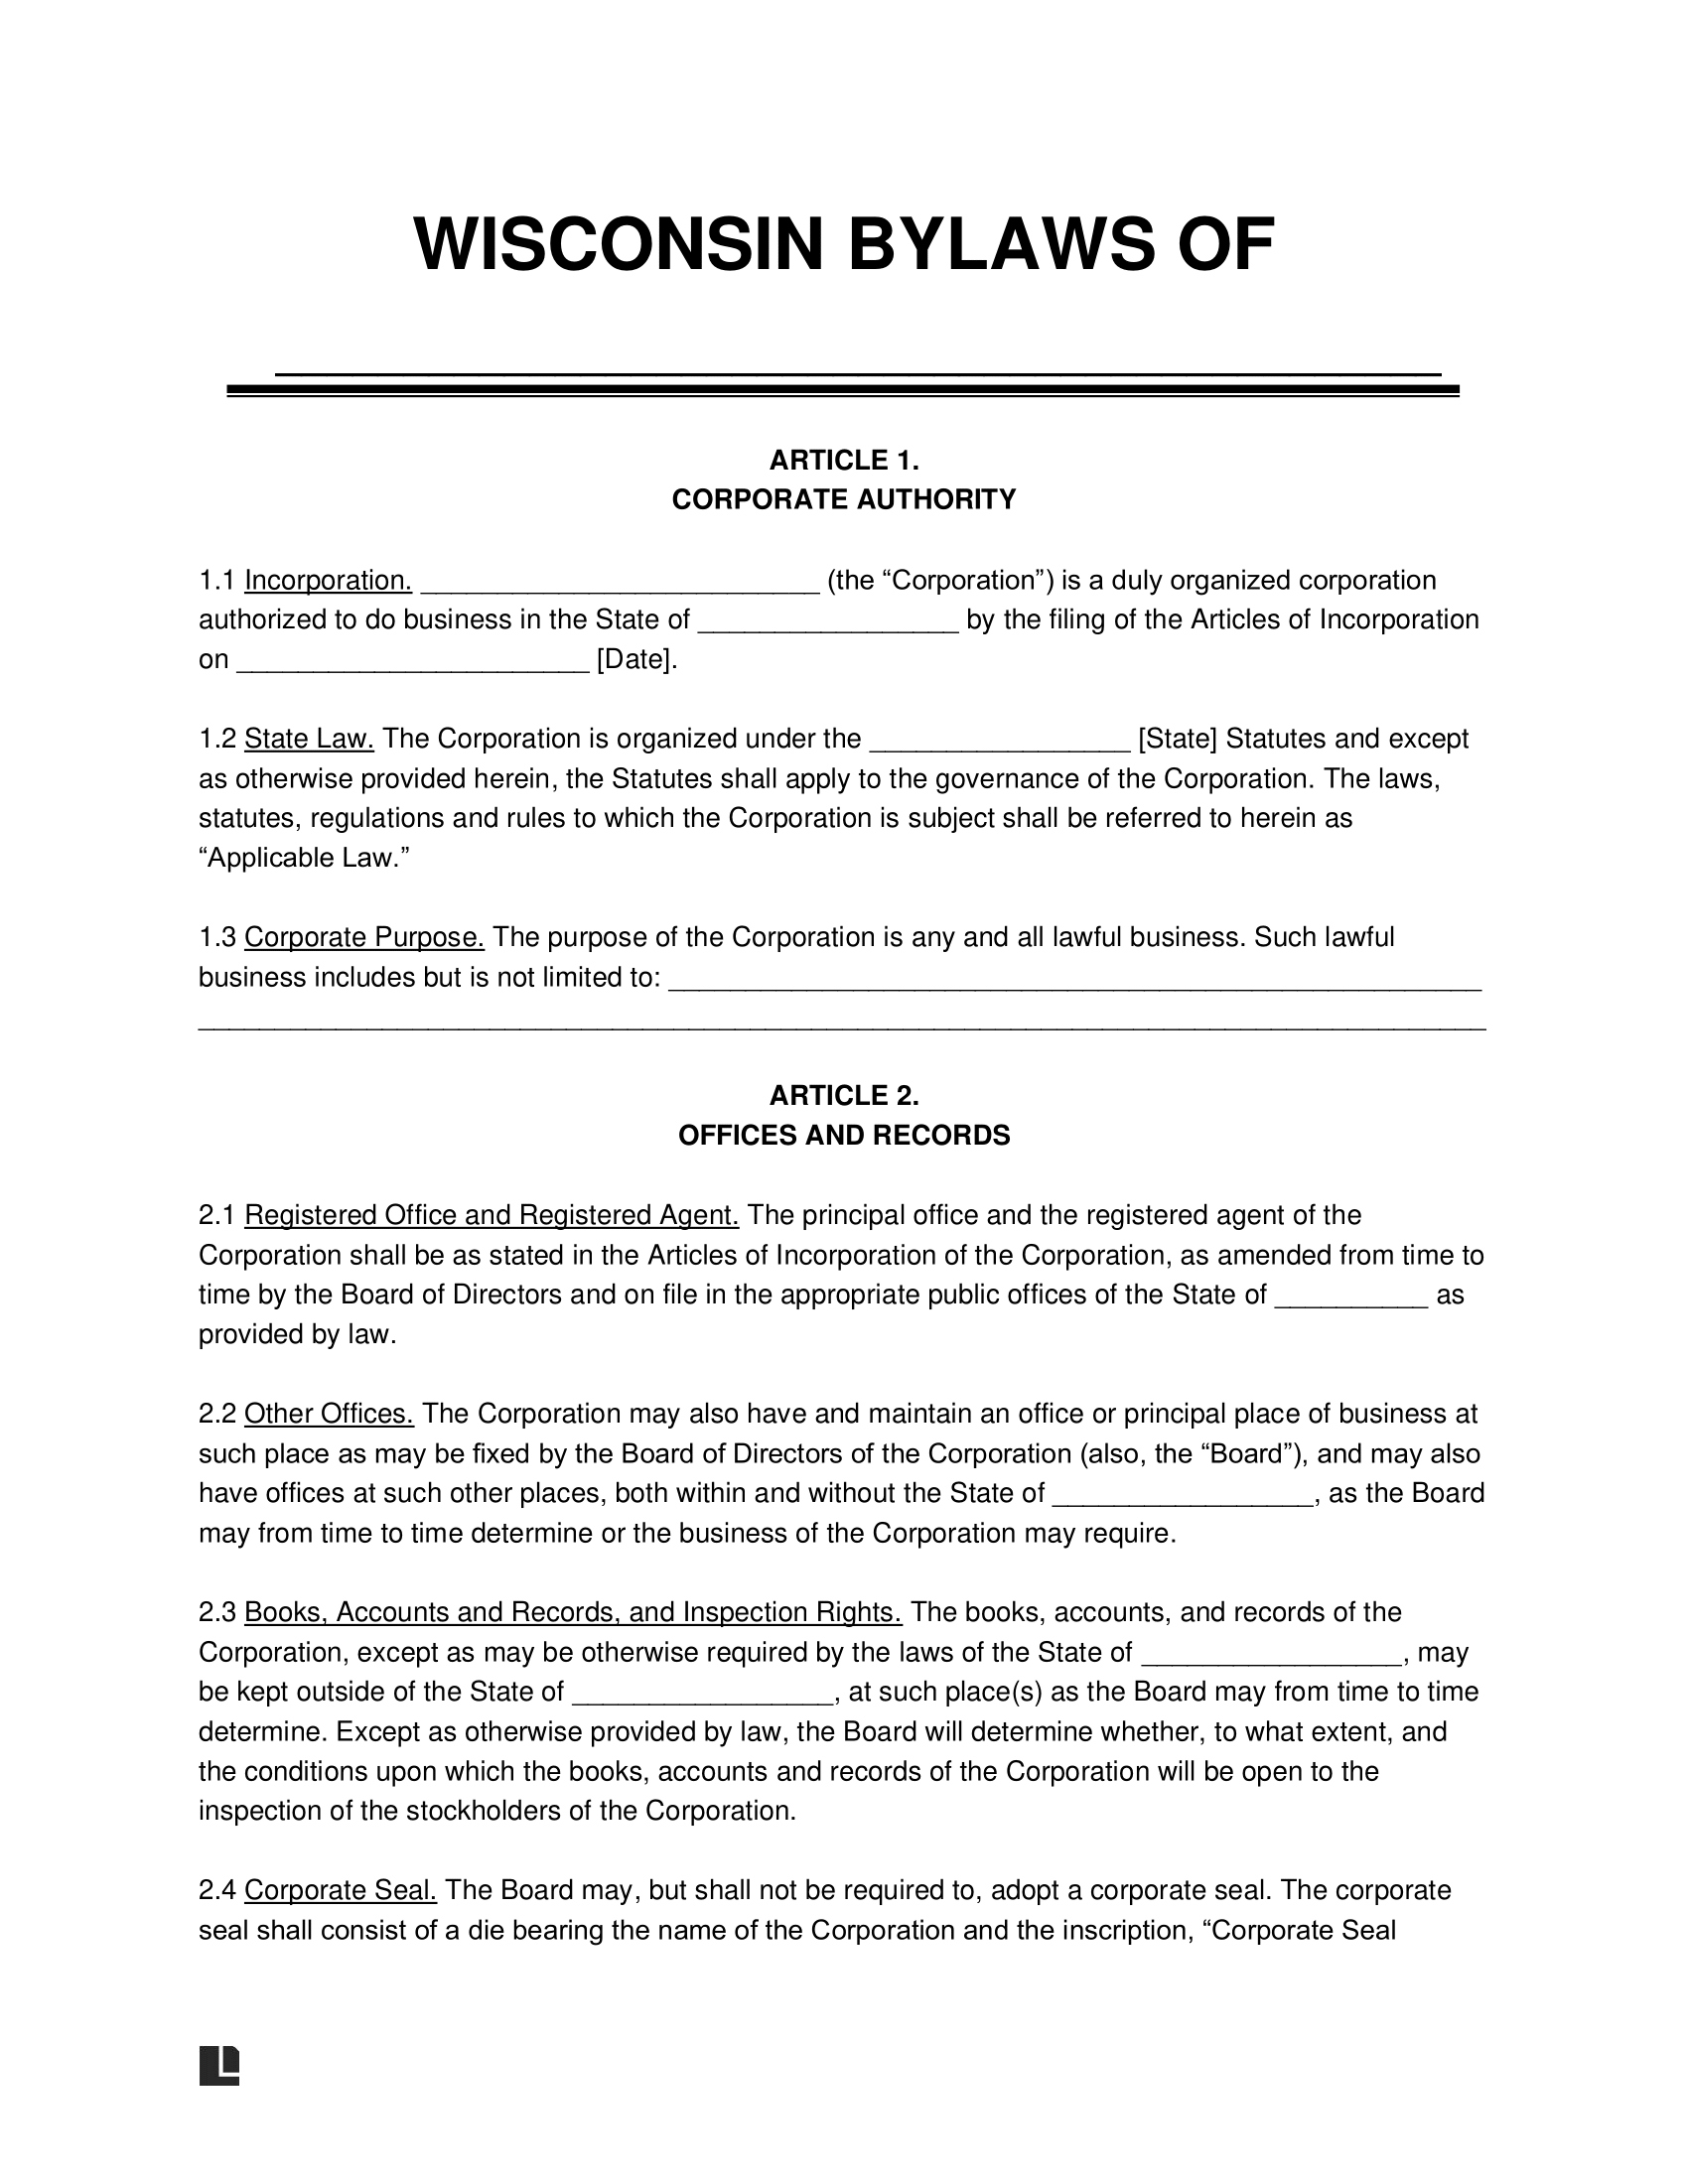 Wisconsin Corporate Bylaws Template